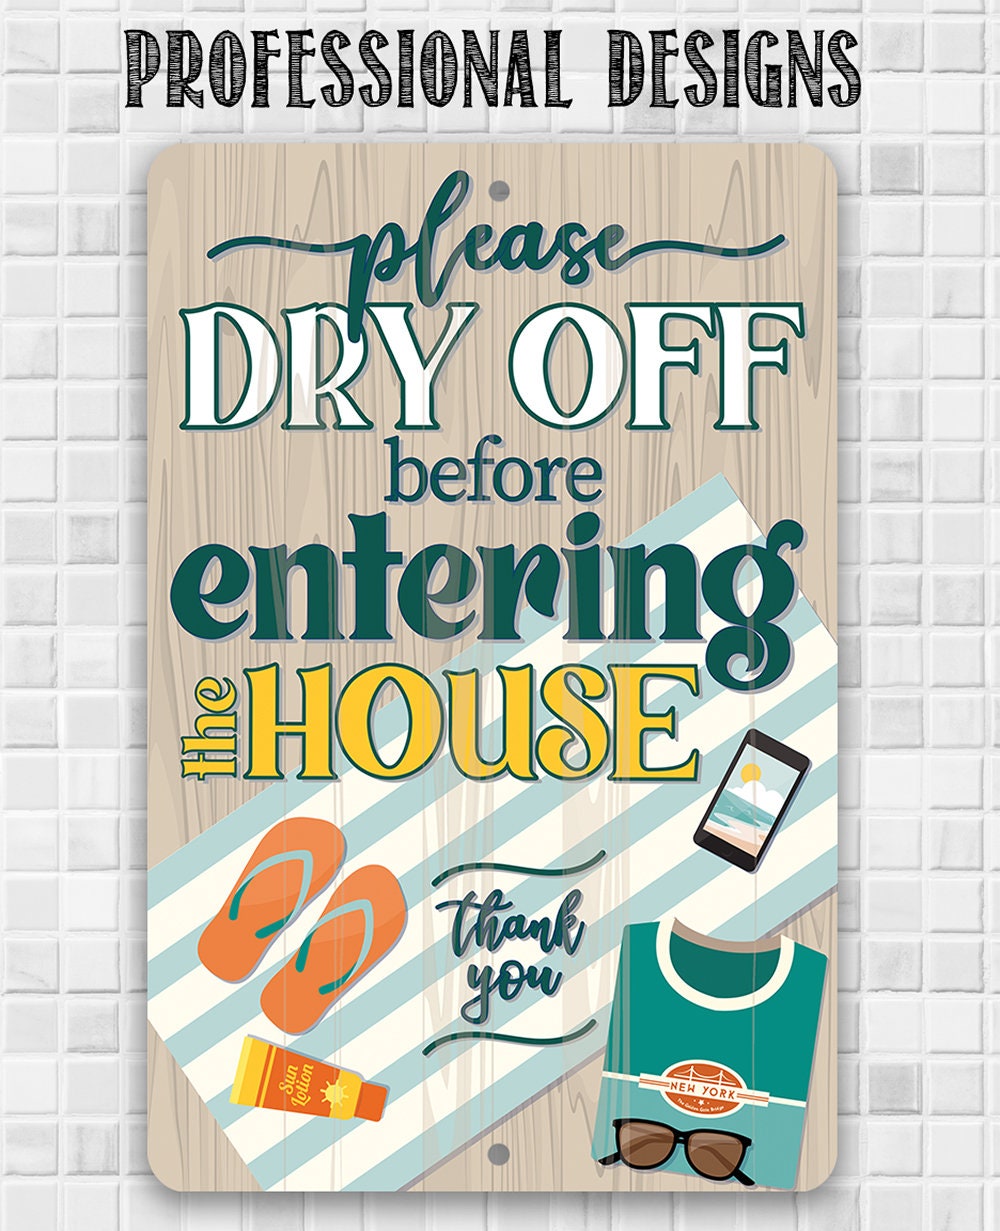 Please Dry Off Before Entering The House - Metal Sign Metal Sign Lone Star Art 